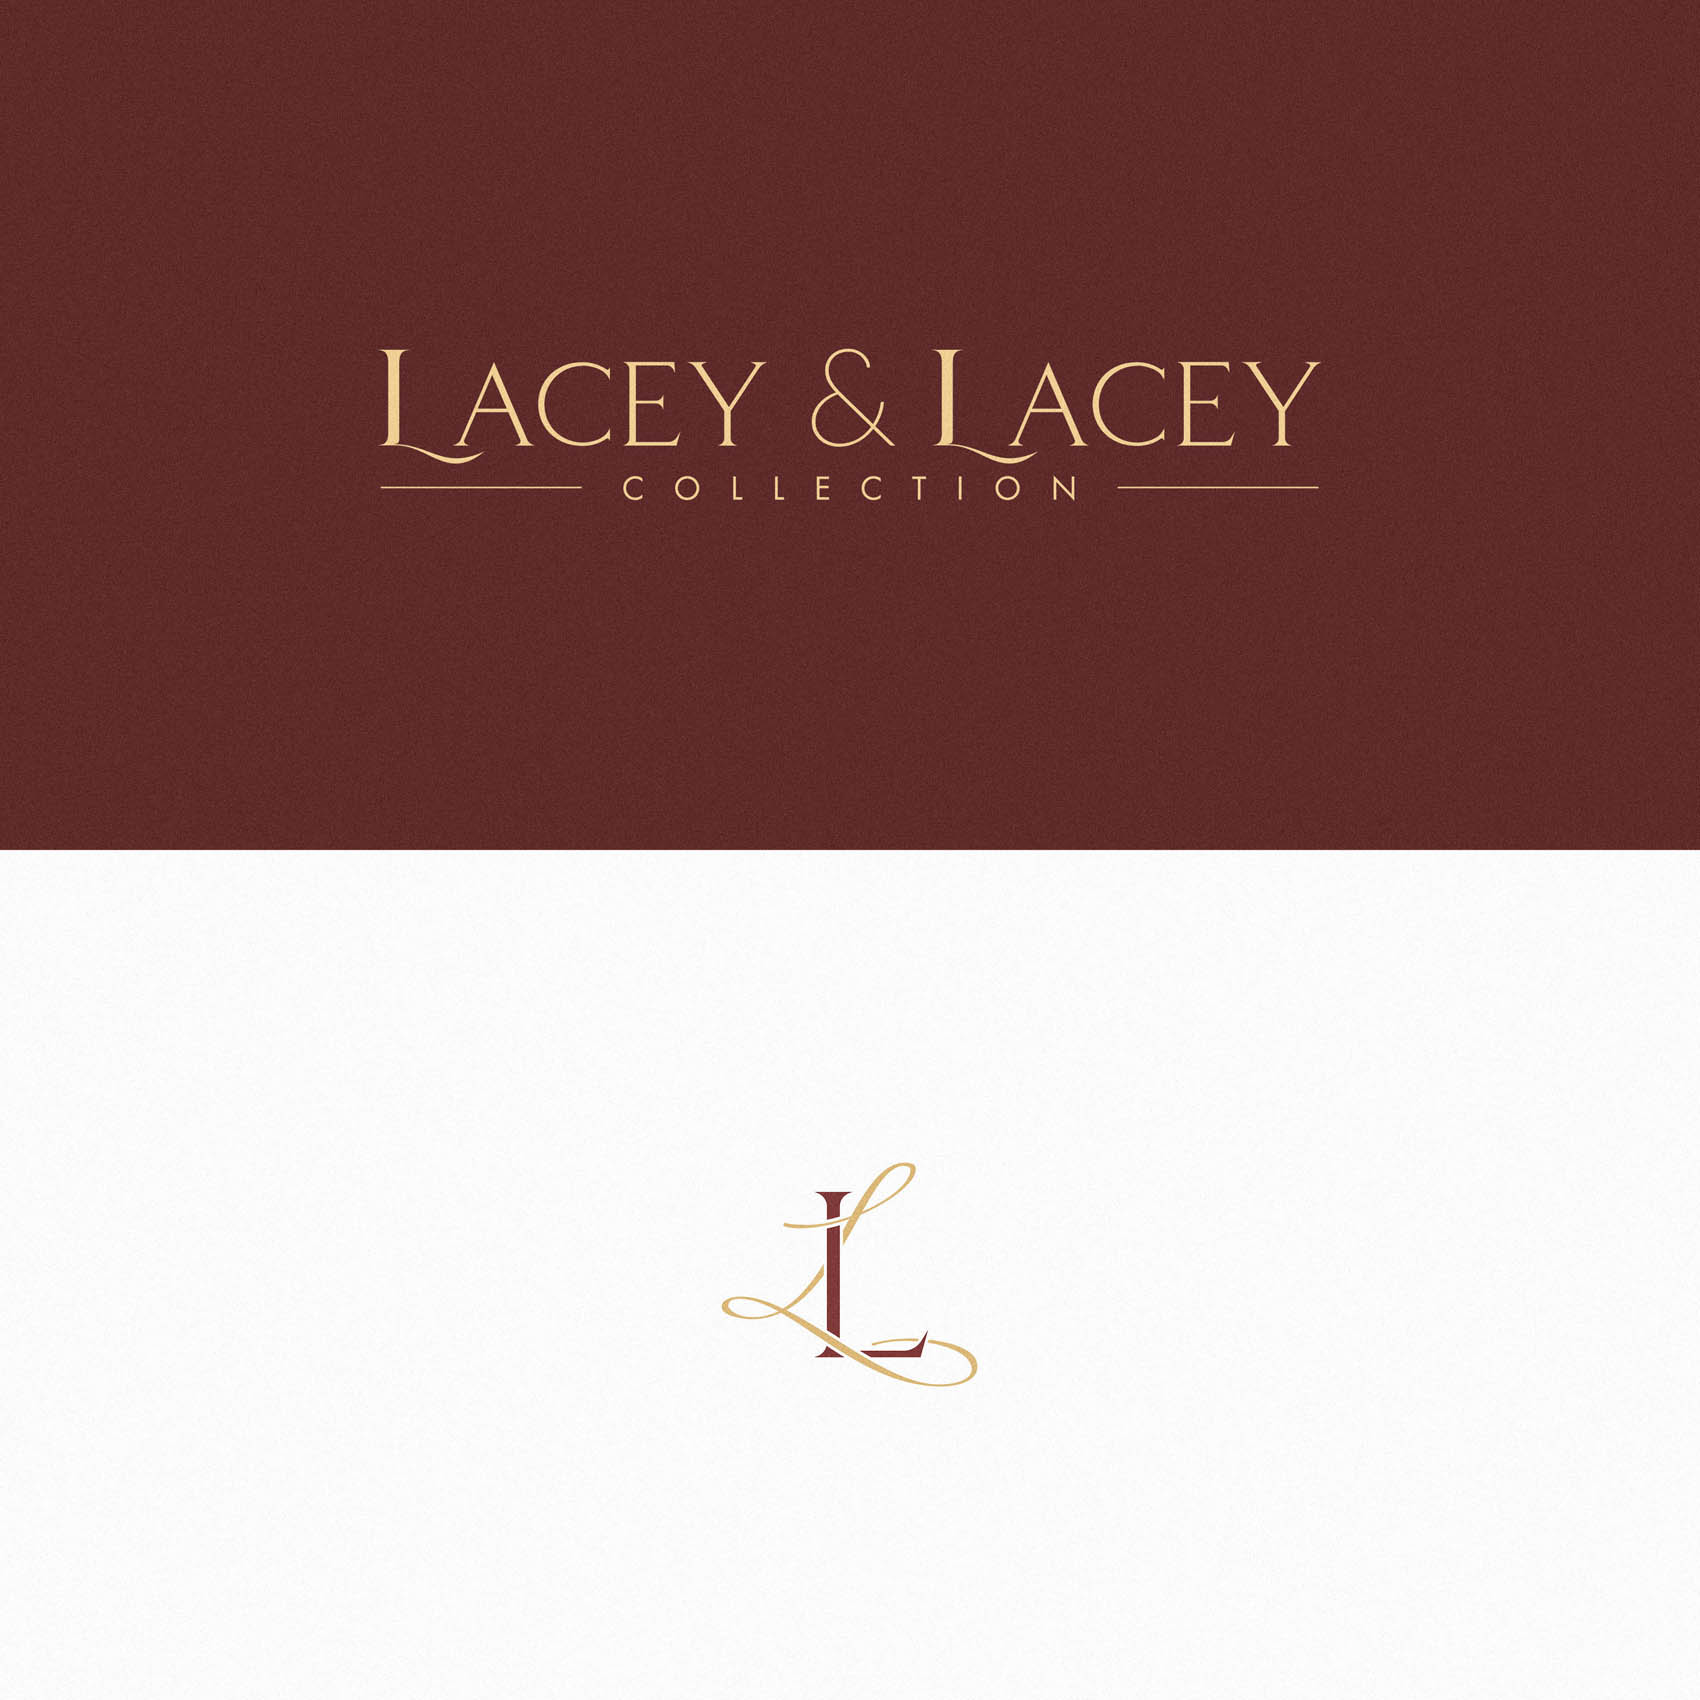 Lacey & Lacey - Luxury Candle Packaging Logo & Brand Identity11